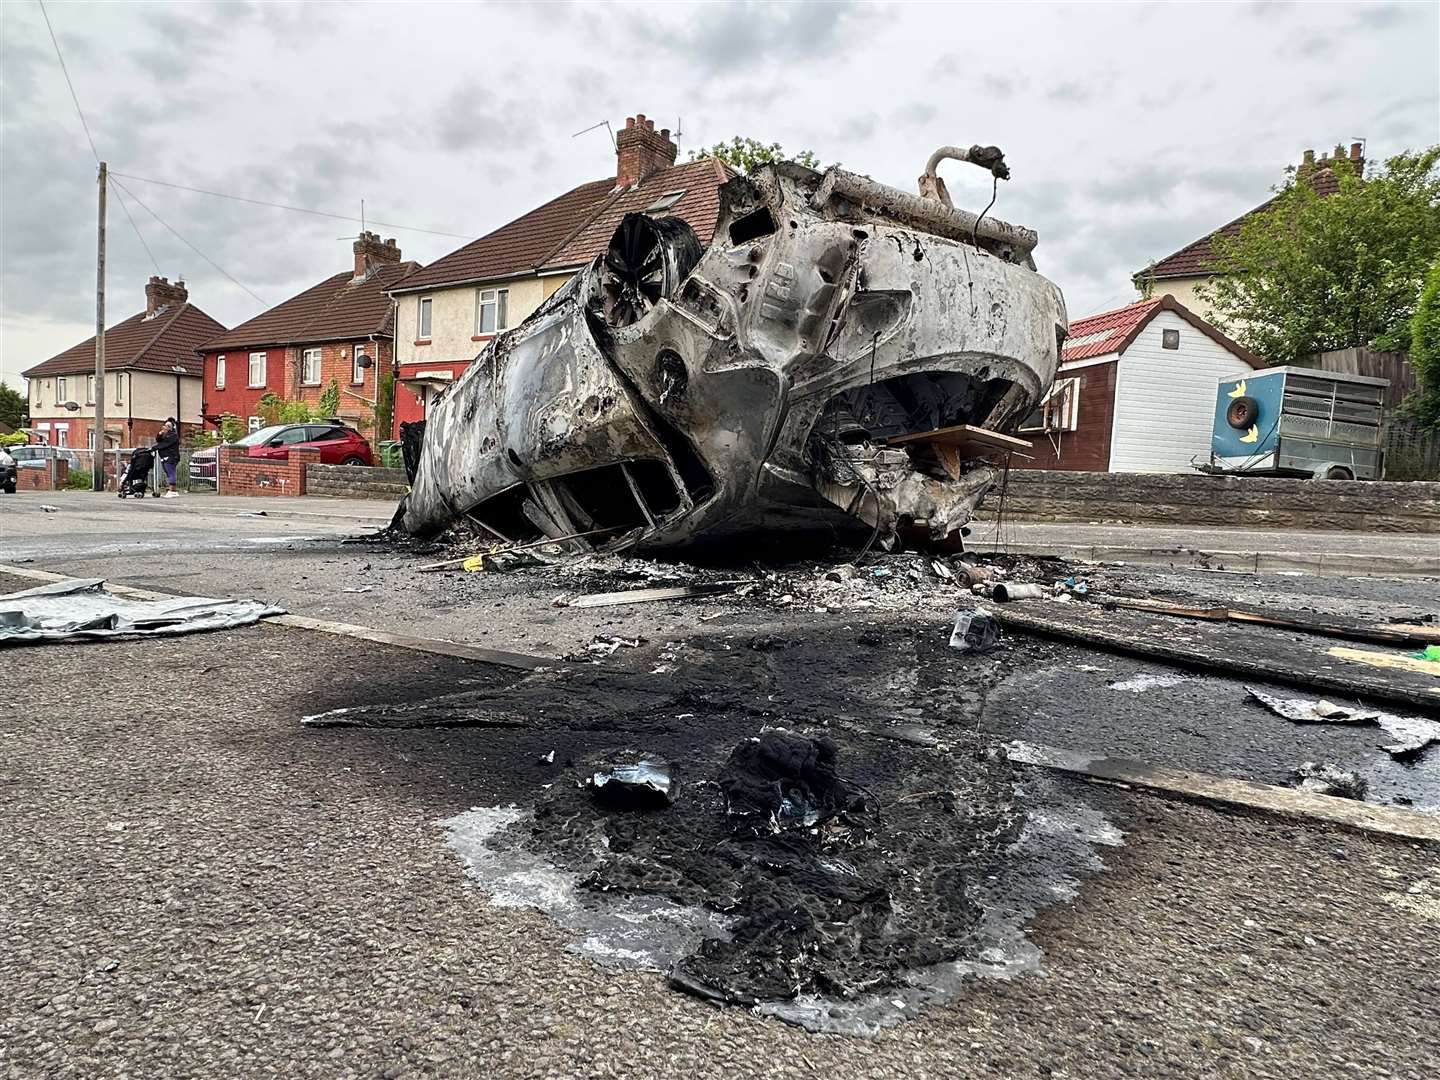 The scene in Ely, Cardiff, following the riot (PA)